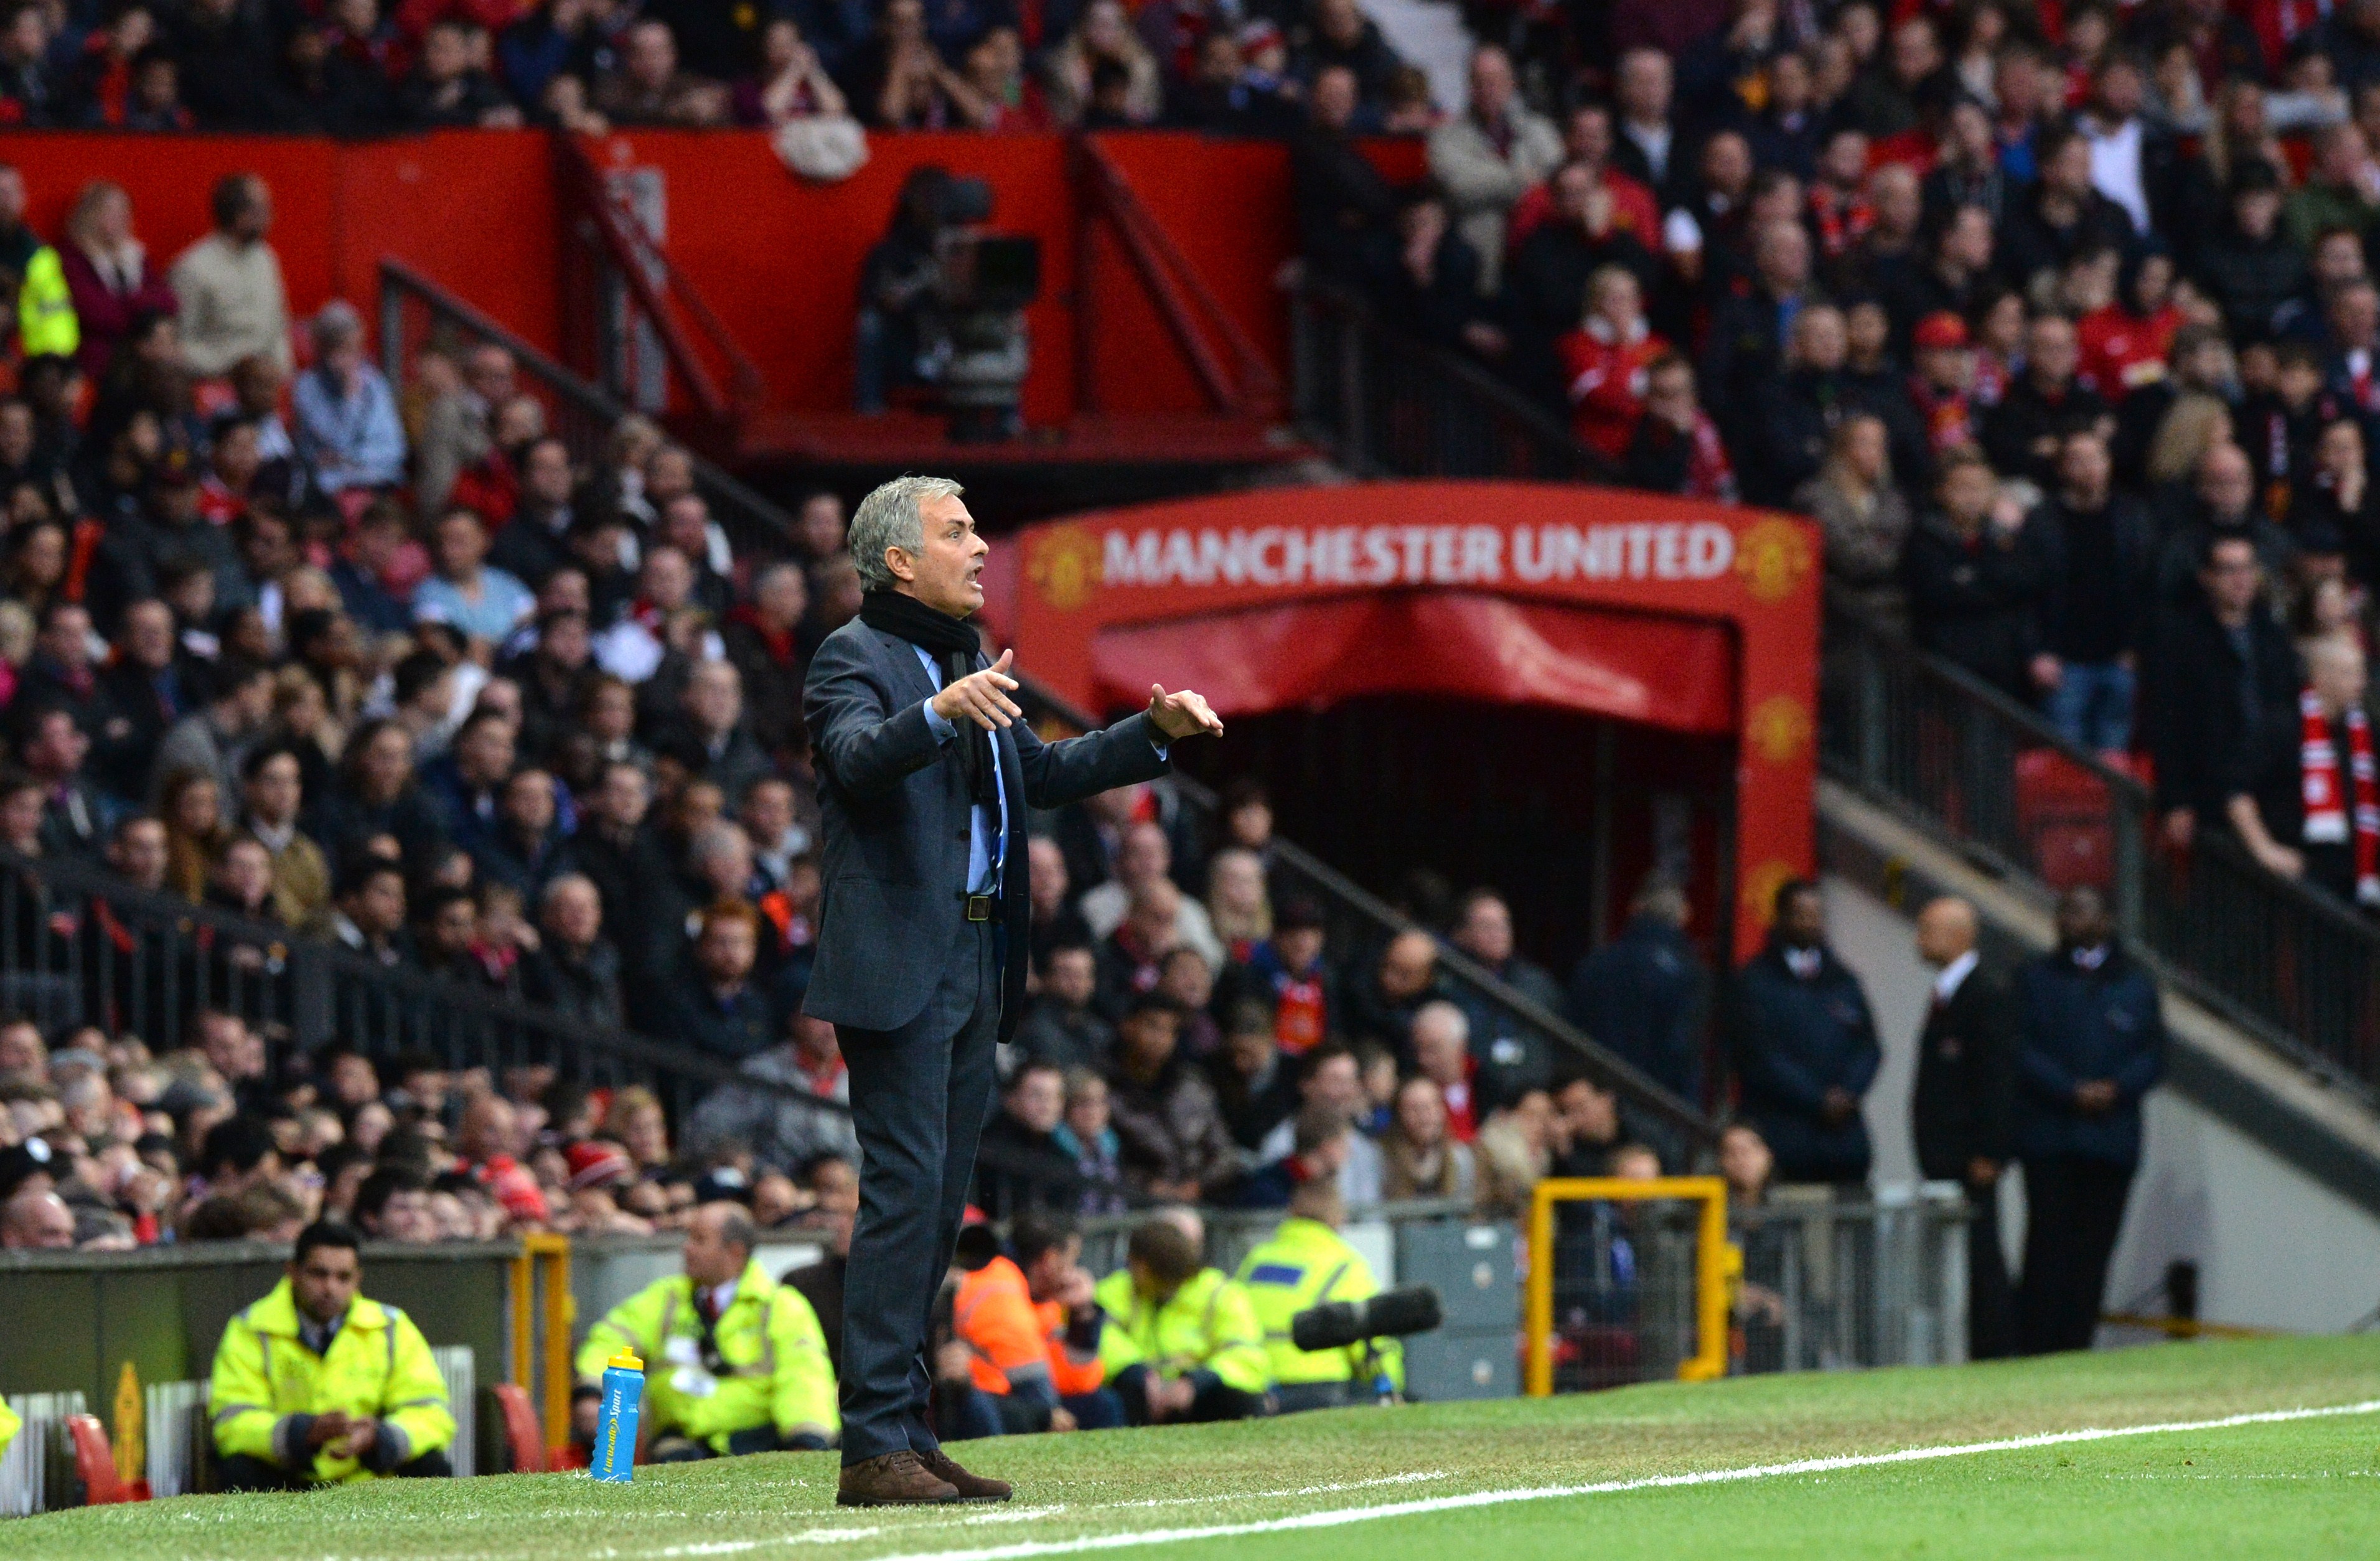 Chelsea's Portuguese manager Jose Mourinho gestures during the English Premier League football match between Manchester United and Chelsea at Old Trafford in Manchester, north west England, on October 26, 2014.  AFP PHOTO / PAUL ELLIS 

RESTRICTED TO EDITORIAL USE. No use with unauthorized audio, video, data, fixture lists, club/league logos or live services. Online in-match use limited to 45 images, no video emulation. No use in betting, games or single club/league/player publications.        (Photo credit should read PAUL ELLIS/AFP/Getty Images)